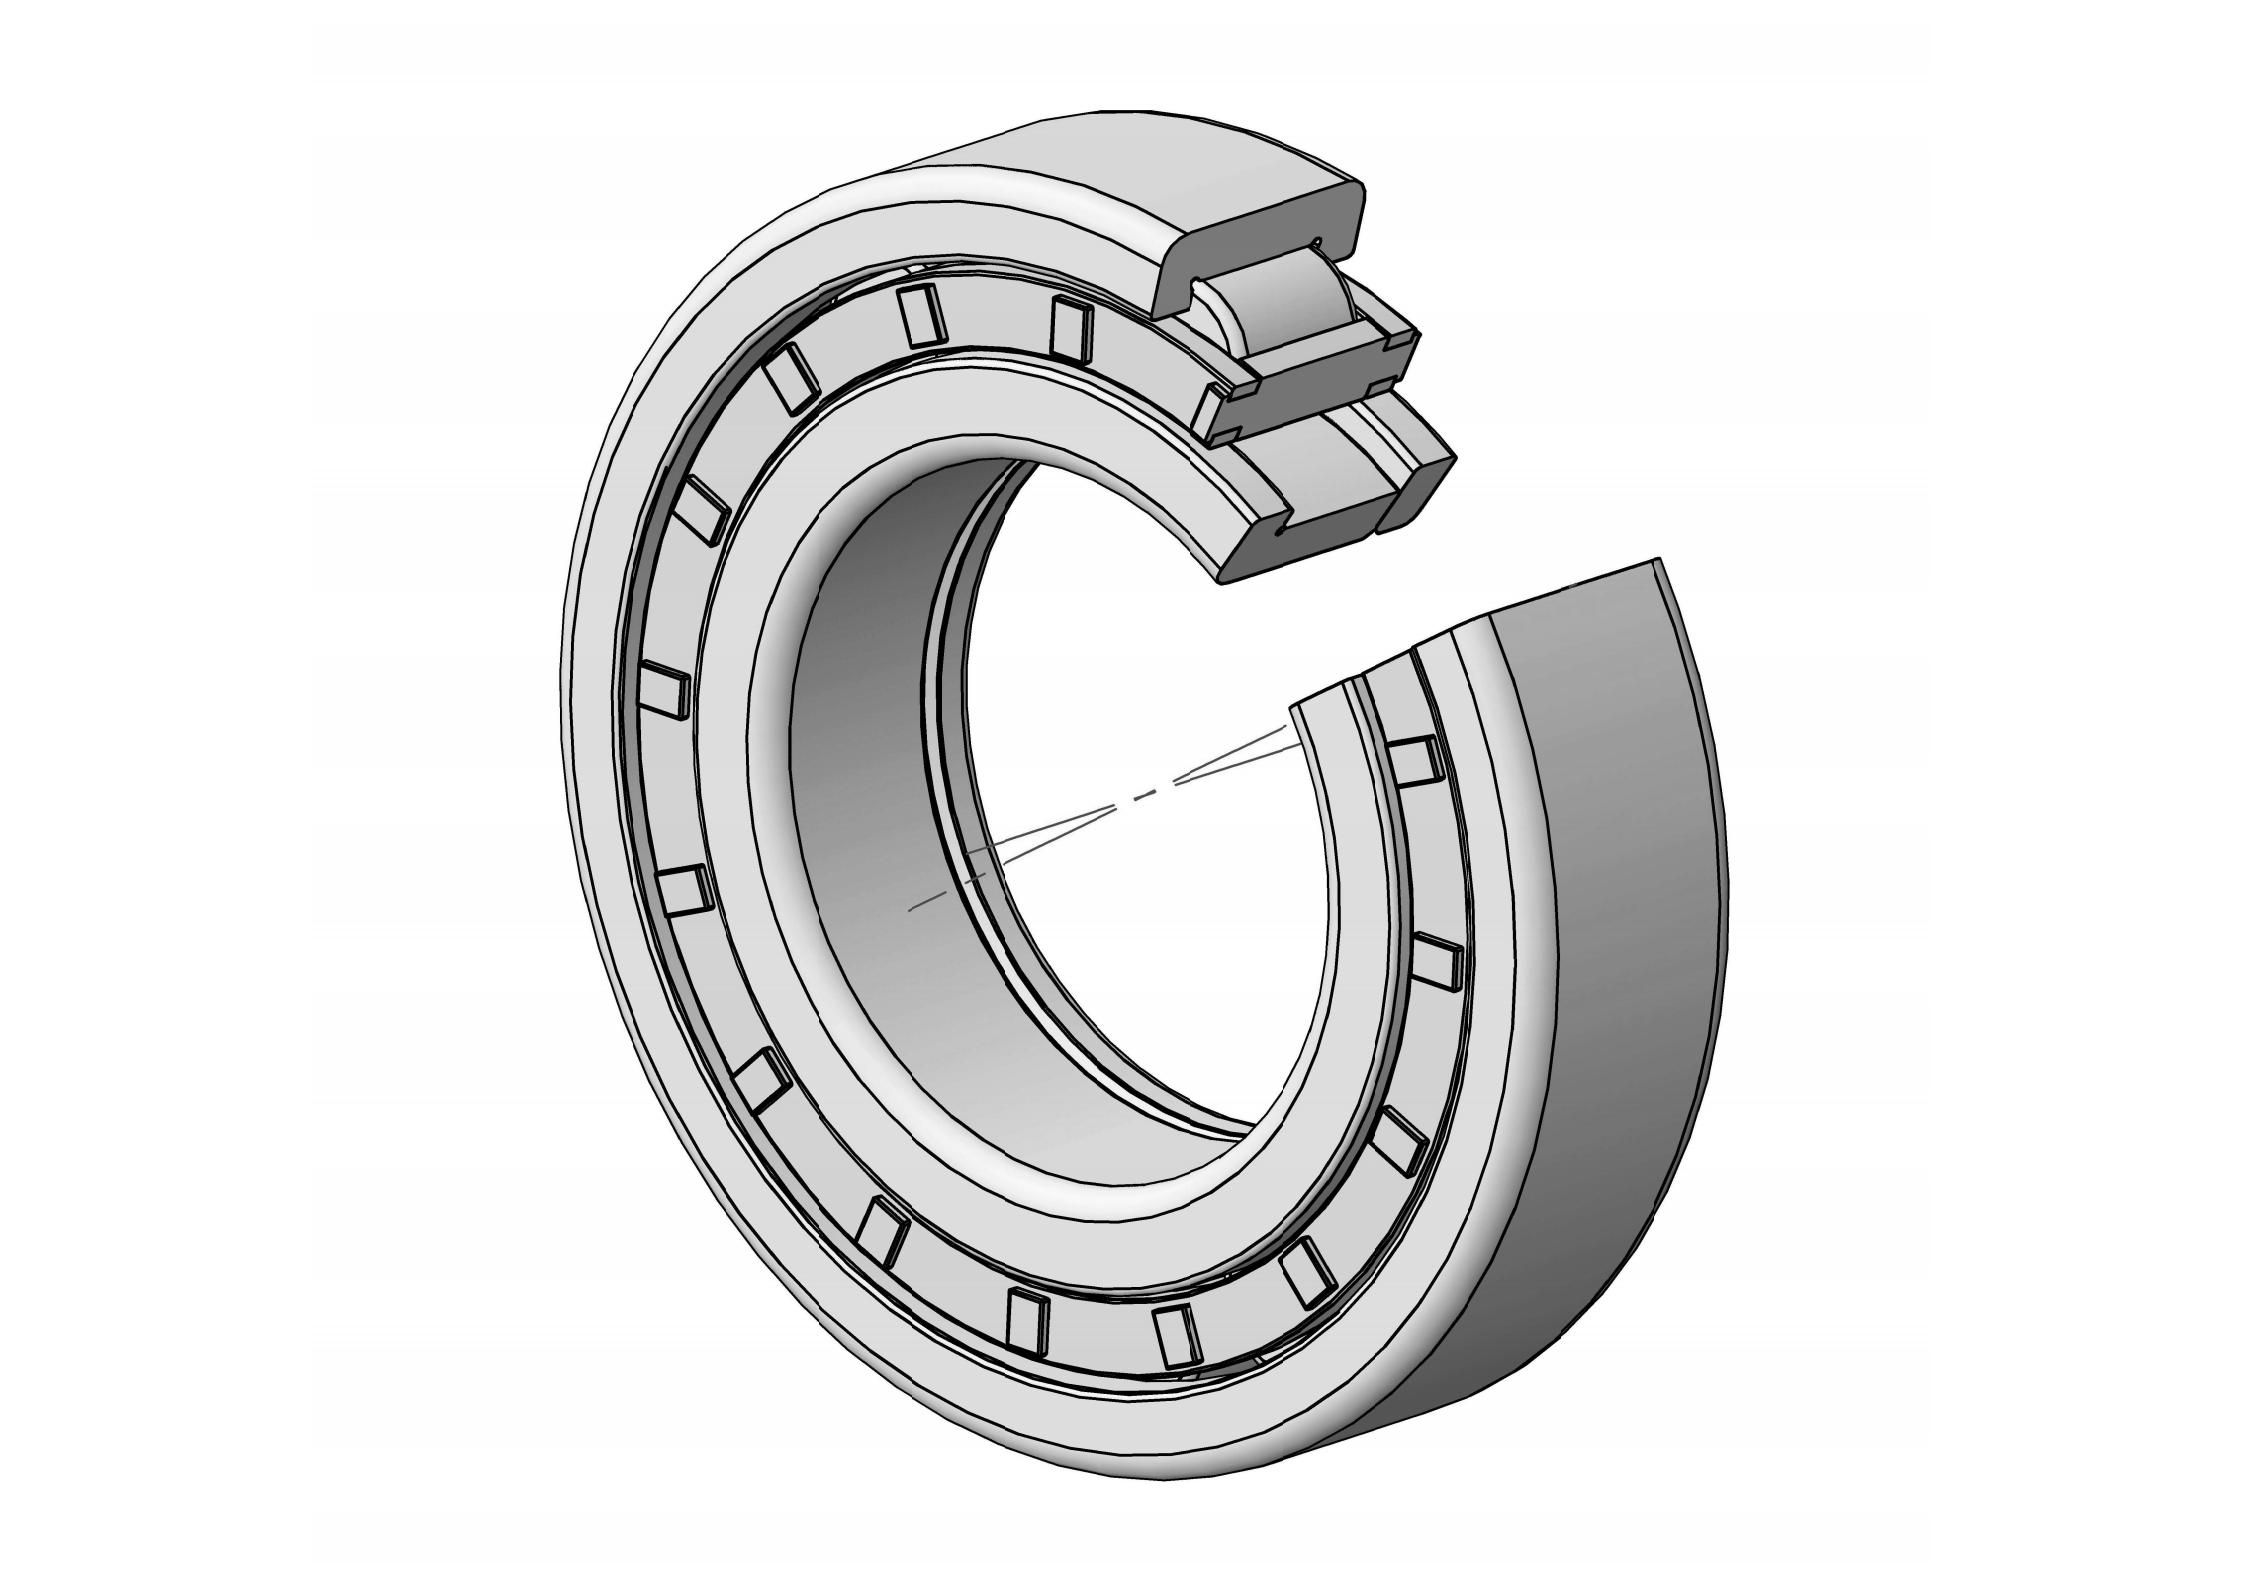 NUP2314-E Single Row Cylindrical roller bearing 